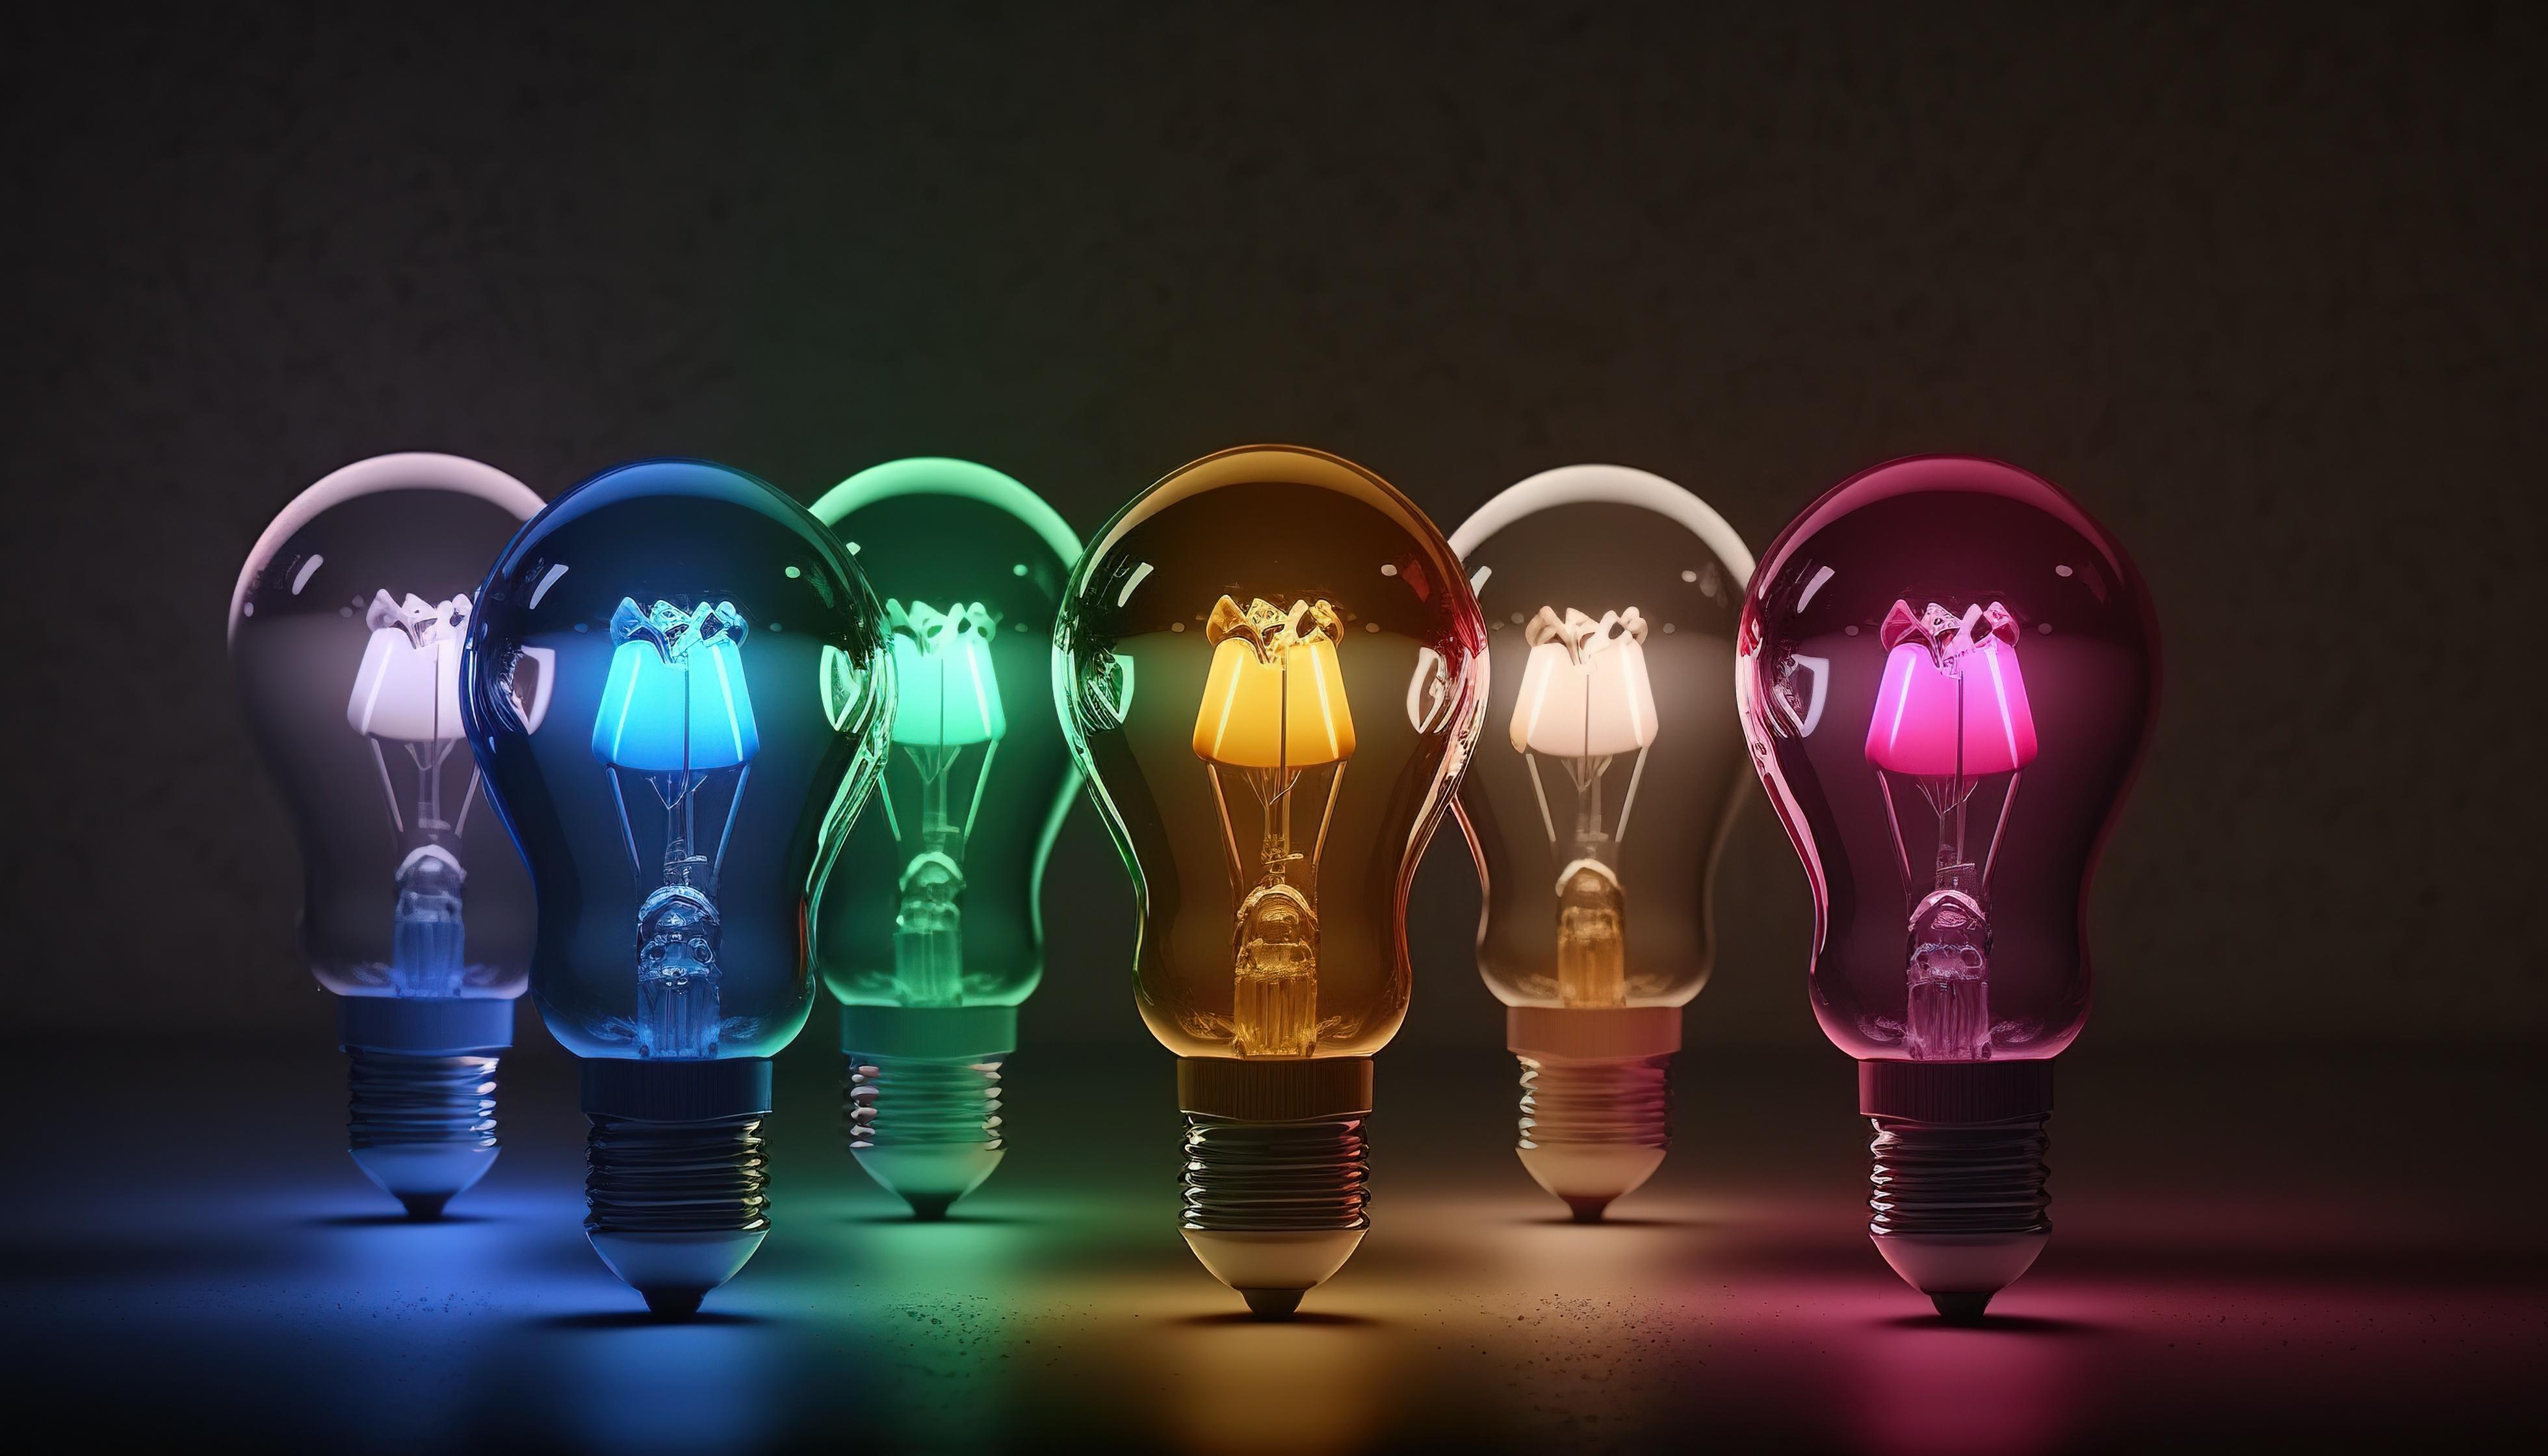 lightbulbs of different colors